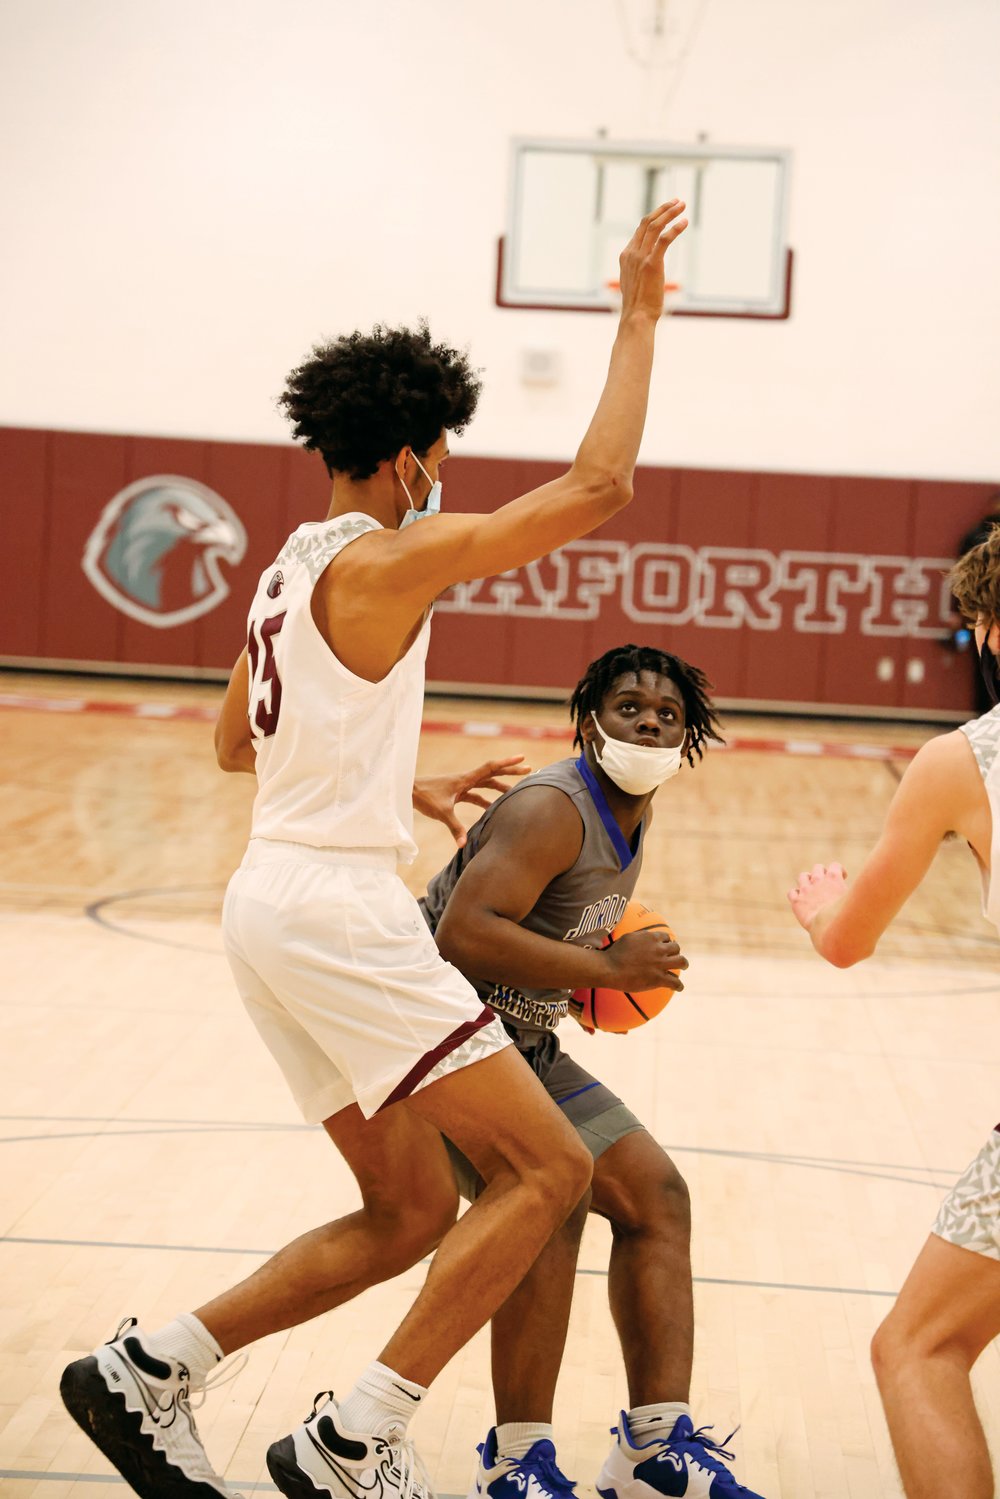 Jordan-Matthews senior Rayshaun Alston (with ball) looks to go up for a shot against Seaforth sophomore Jarin Stevenson in the Jets' triple-overtime loss, 70-61, to the Seaforth Hawks last Friday in Pittsboro. Alston was the Jets' leading scorer on the night with 29 points.